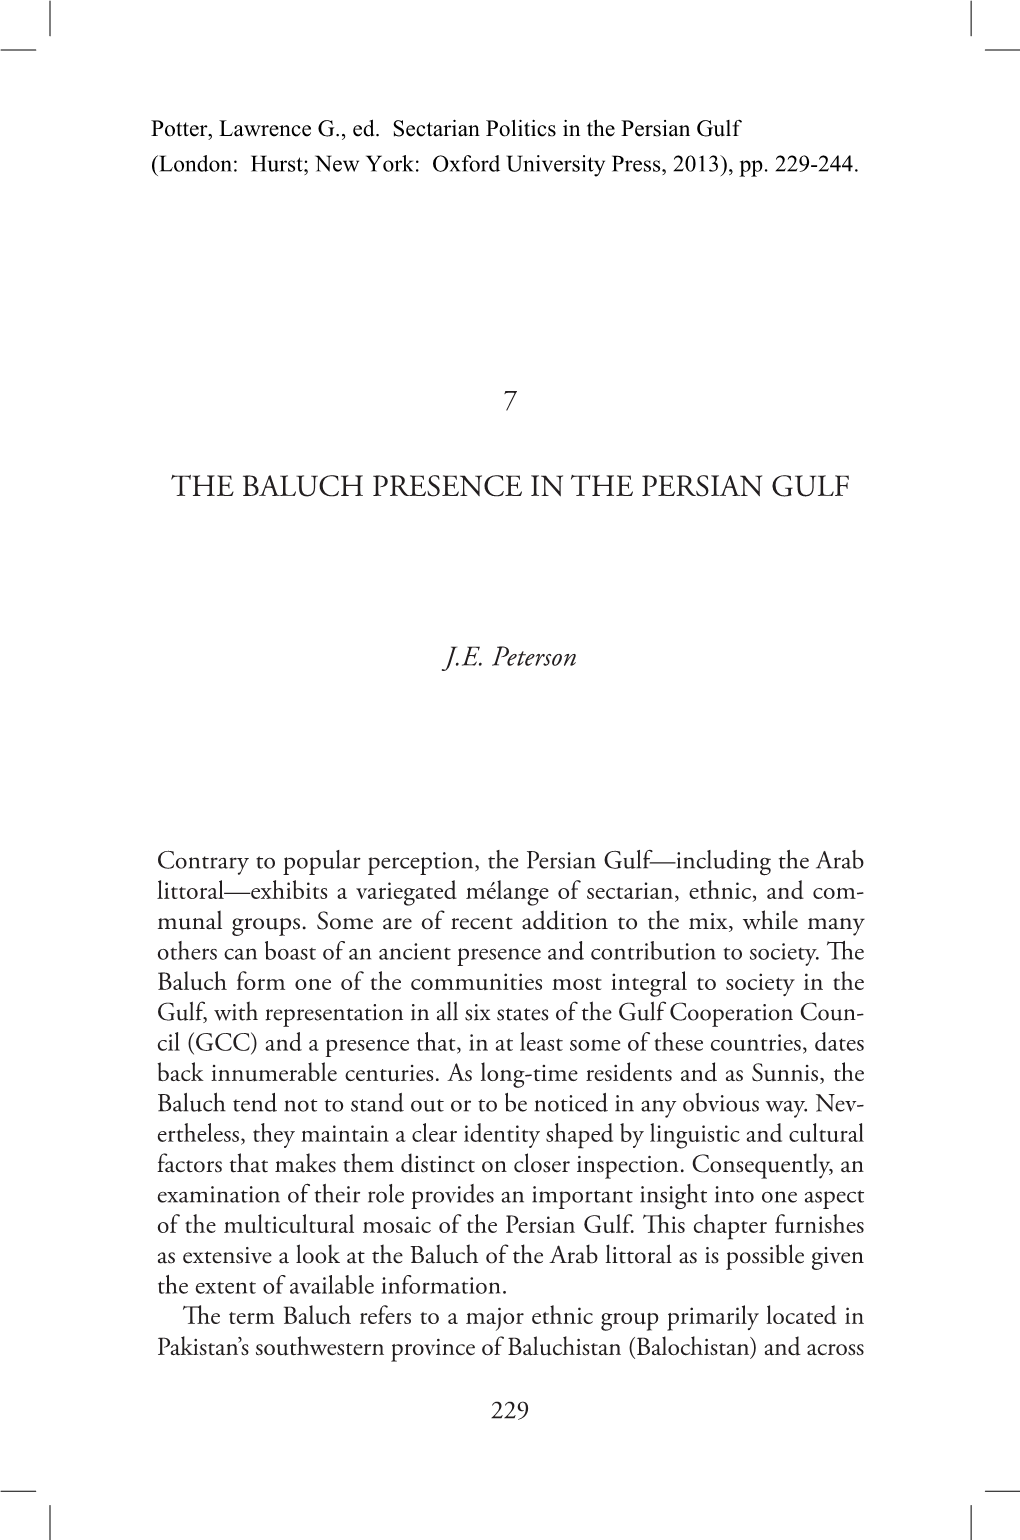 The Baluch Presence in the Persian Gulf